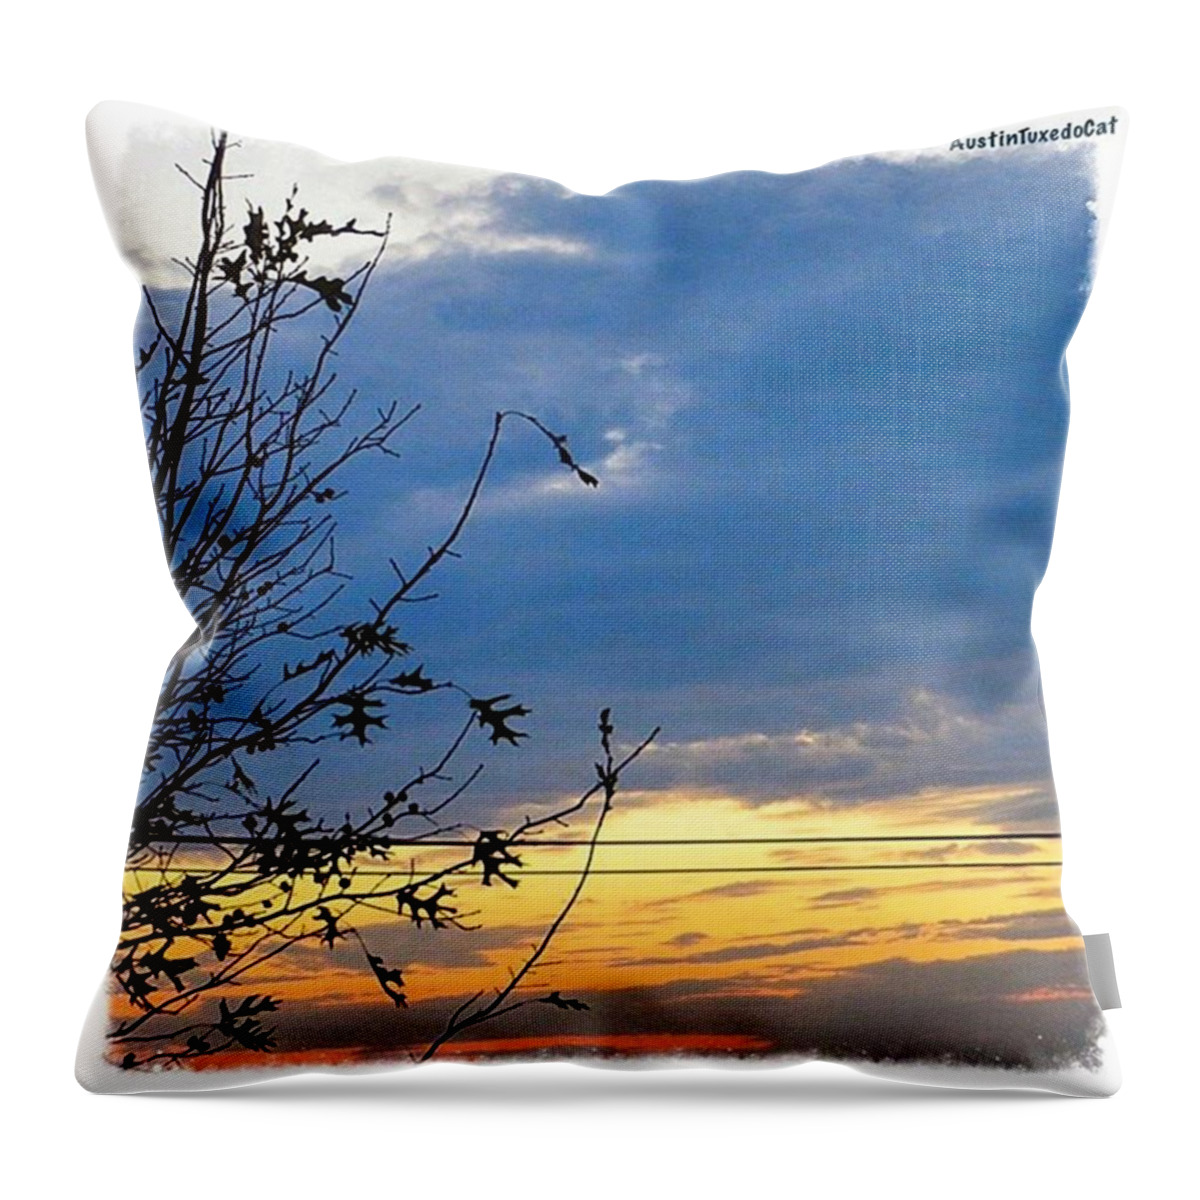 Sunrise_and_sunsets Throw Pillow featuring the photograph Wishing You Extra Sweet #dreams From by Austin Tuxedo Cat